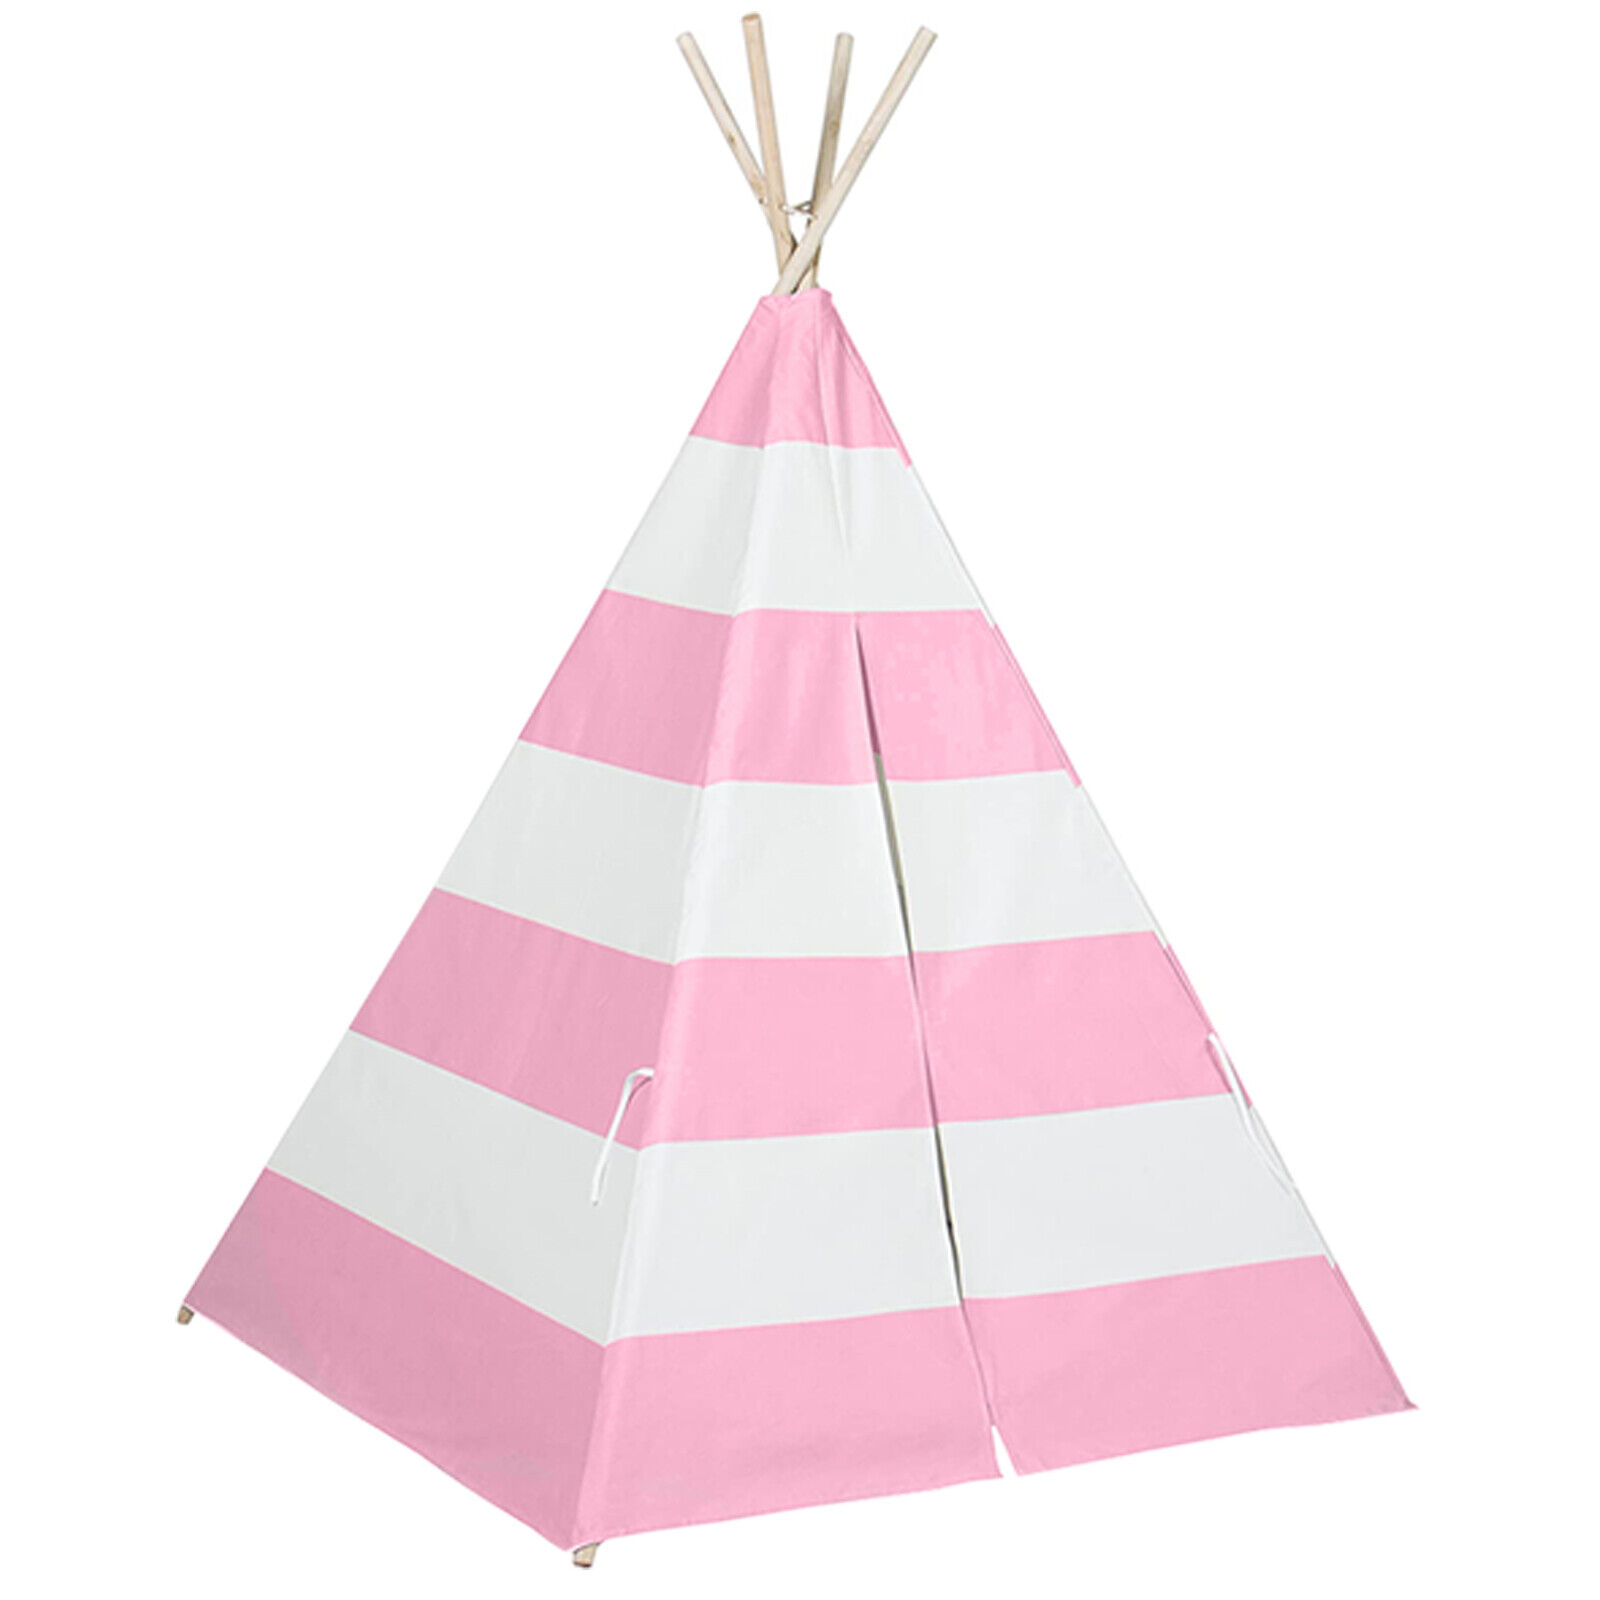 Pink - White Stripes Children Kids Summer Garden Room Teepee Tent Play House Wigwam Cotton Canvas Indoor Outdoor Camping